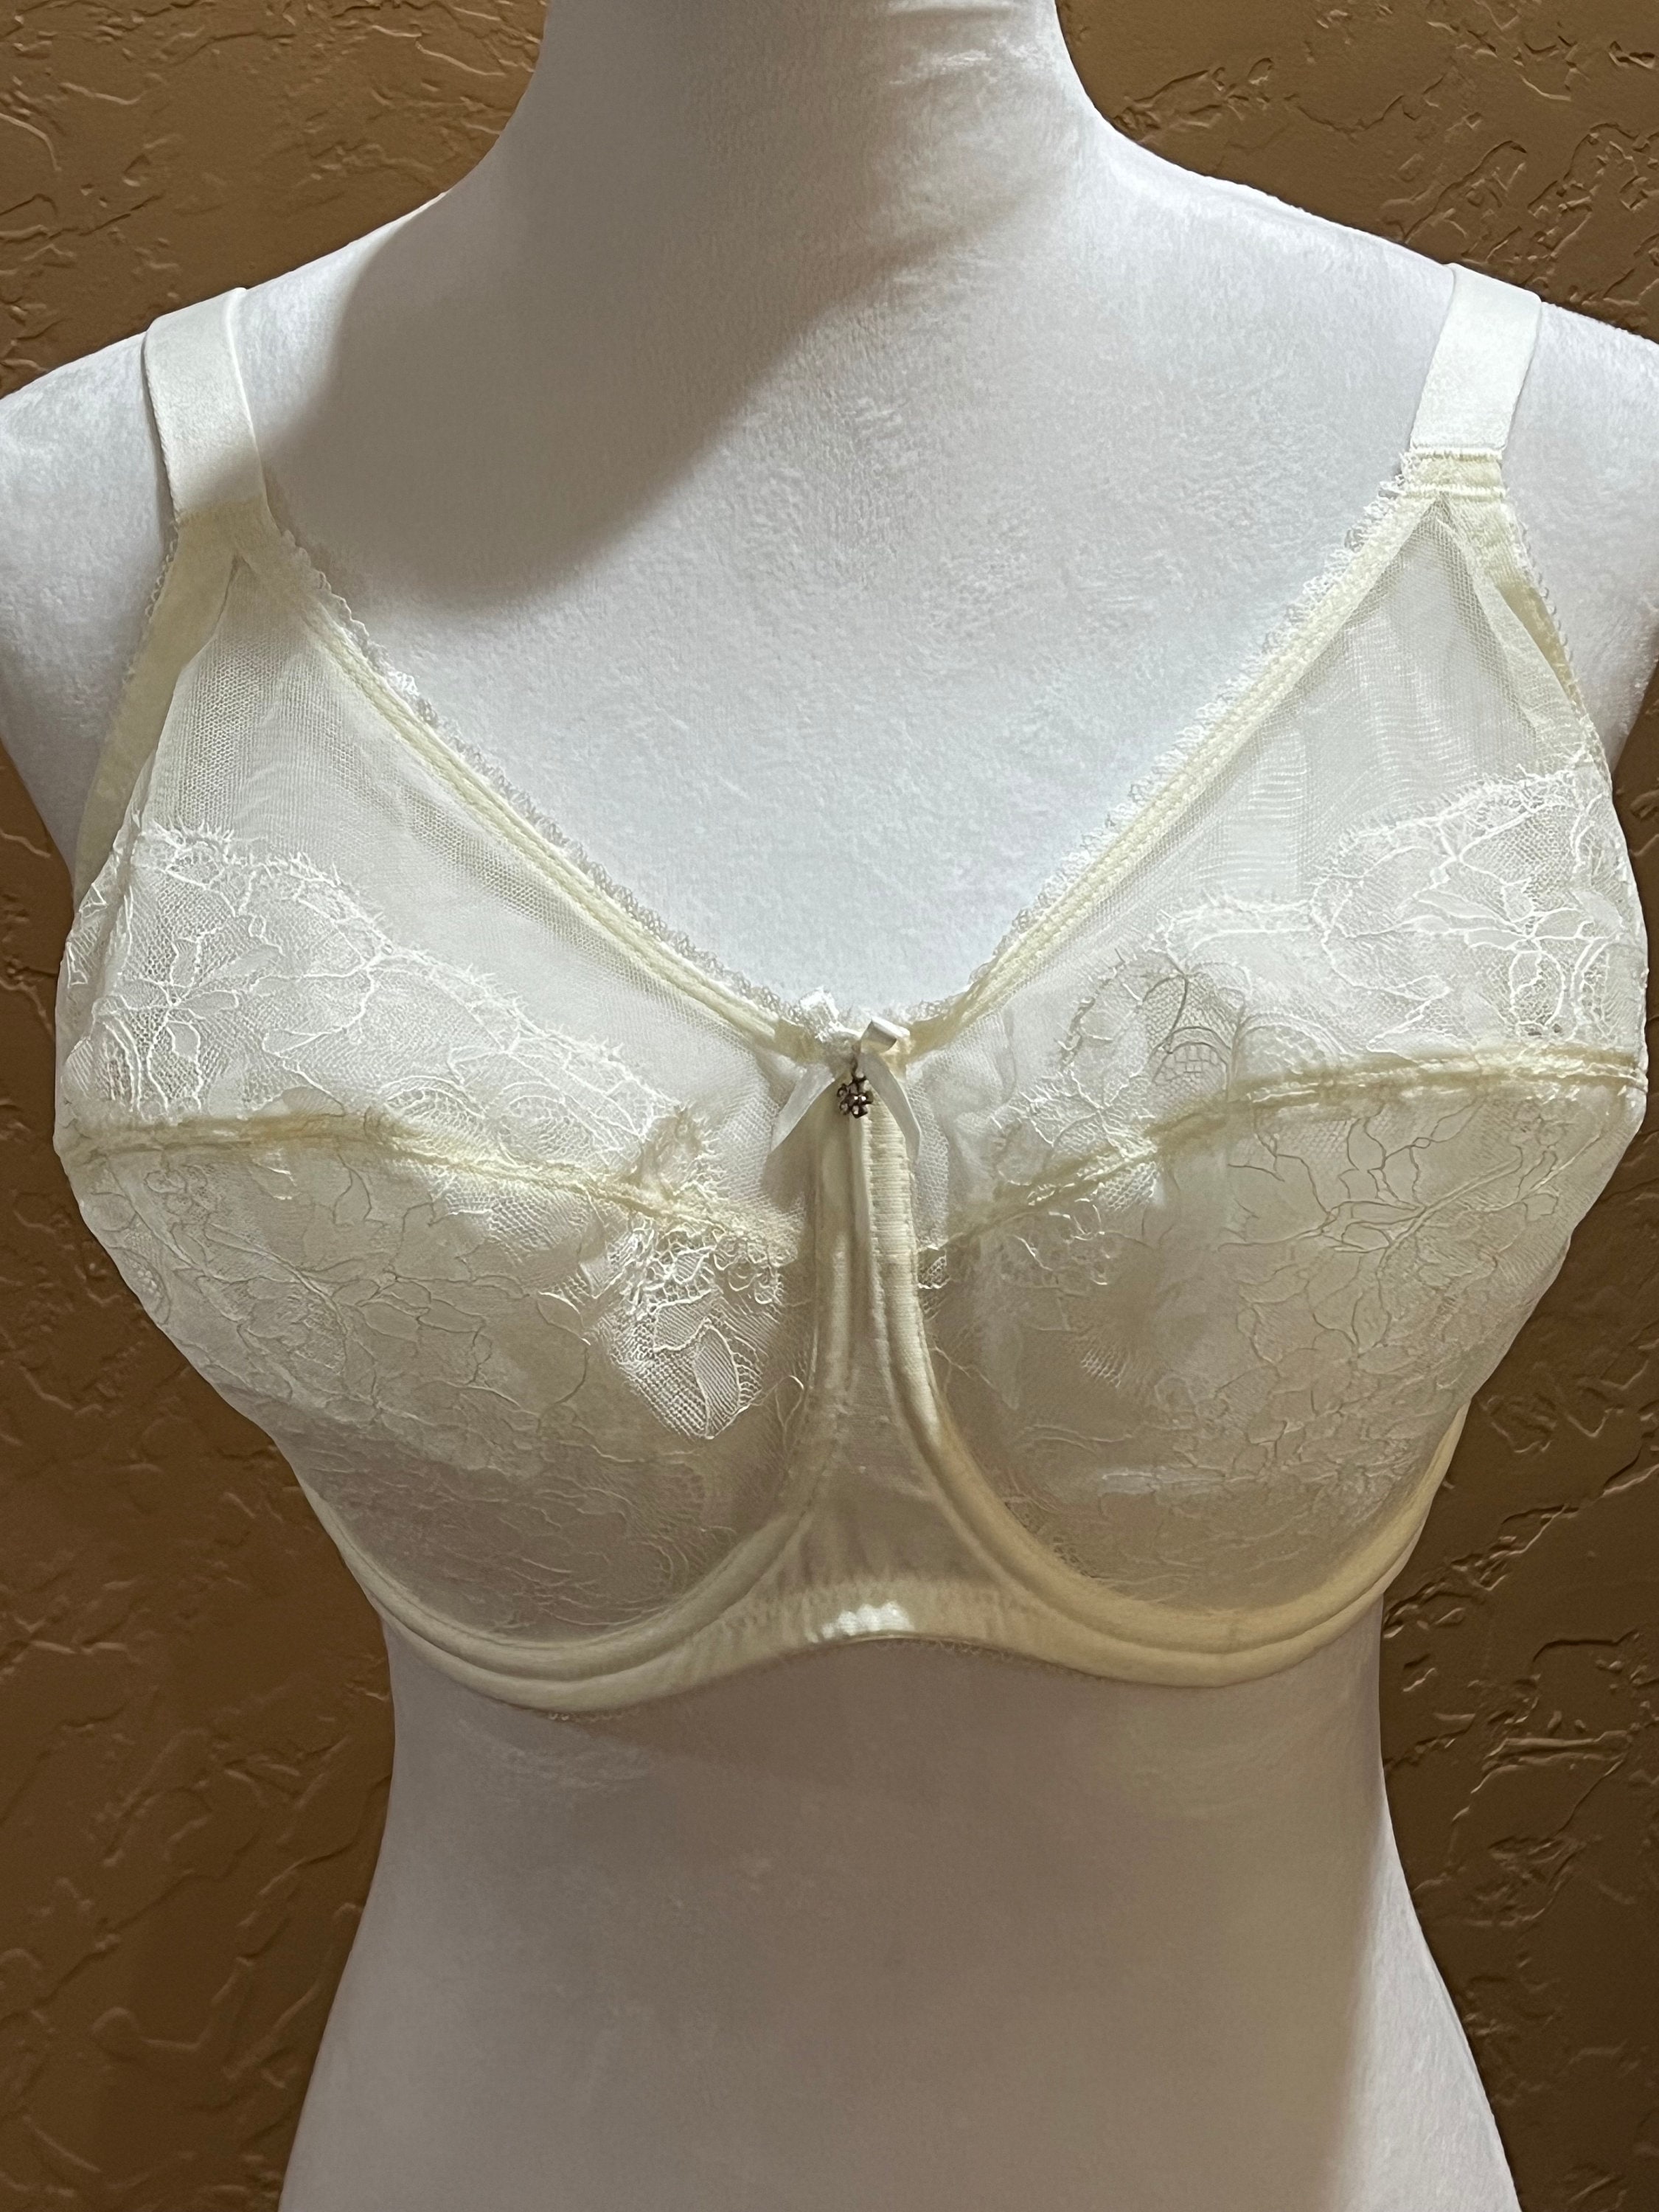 Polyester Solid Underscore Bras & Bra Sets for Women for sale